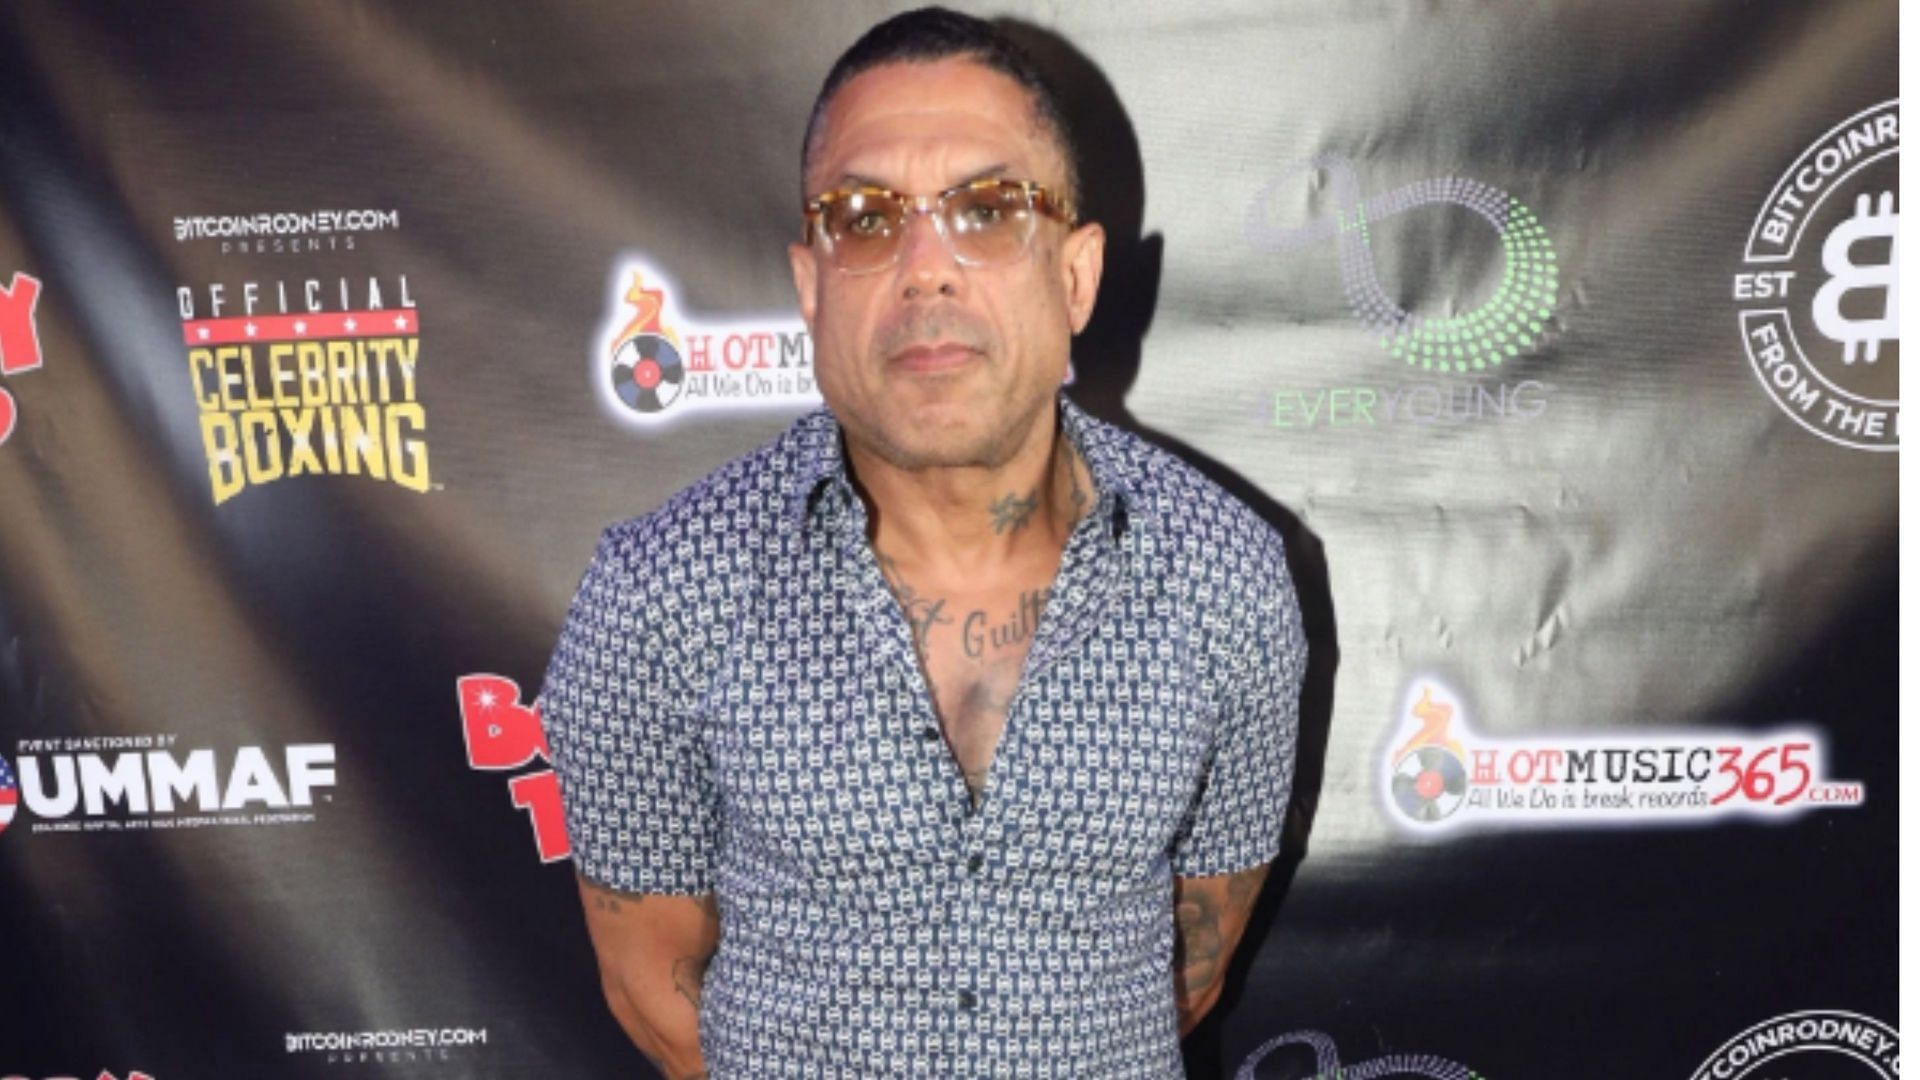 Benzino at a boxing event in Florida. (Image via Getty/ Aaron Davidson)